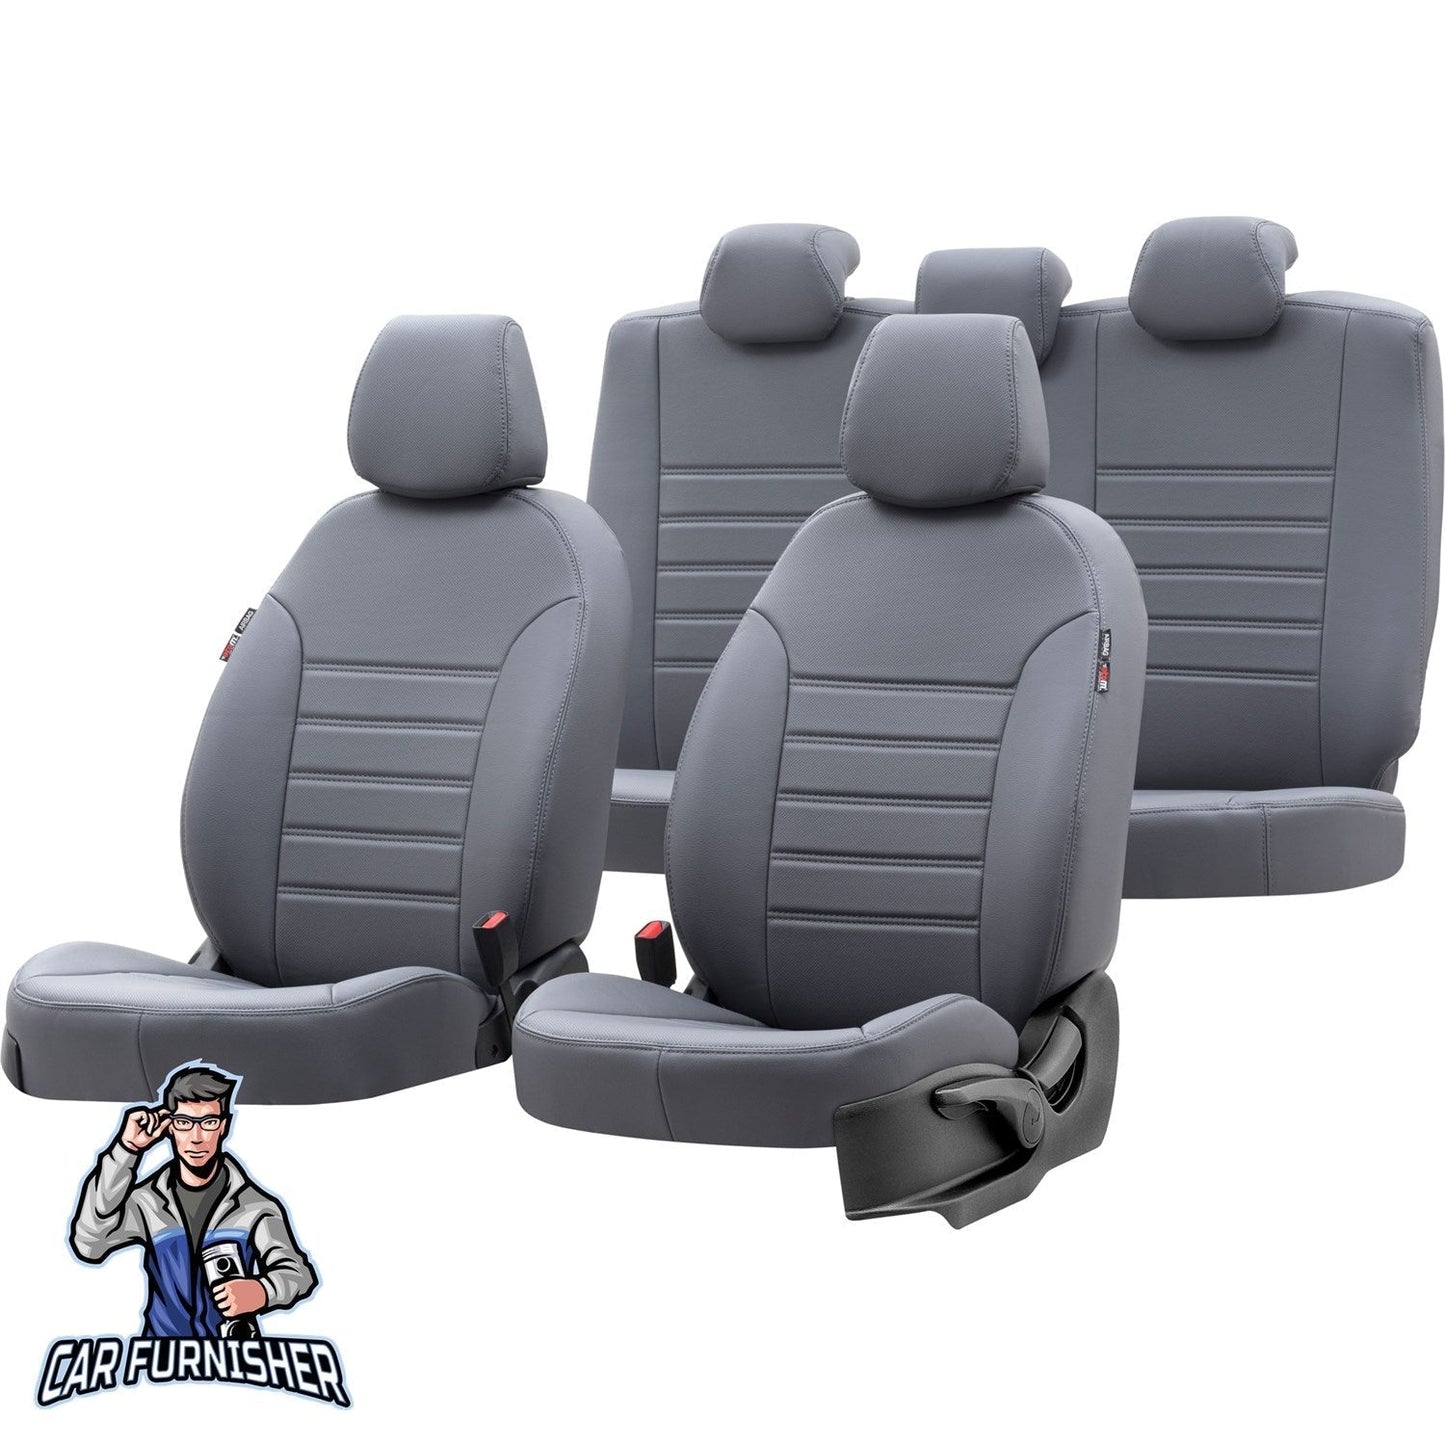 Skoda Roomstar Seat Cover Istanbul Leather Design Smoked Leather